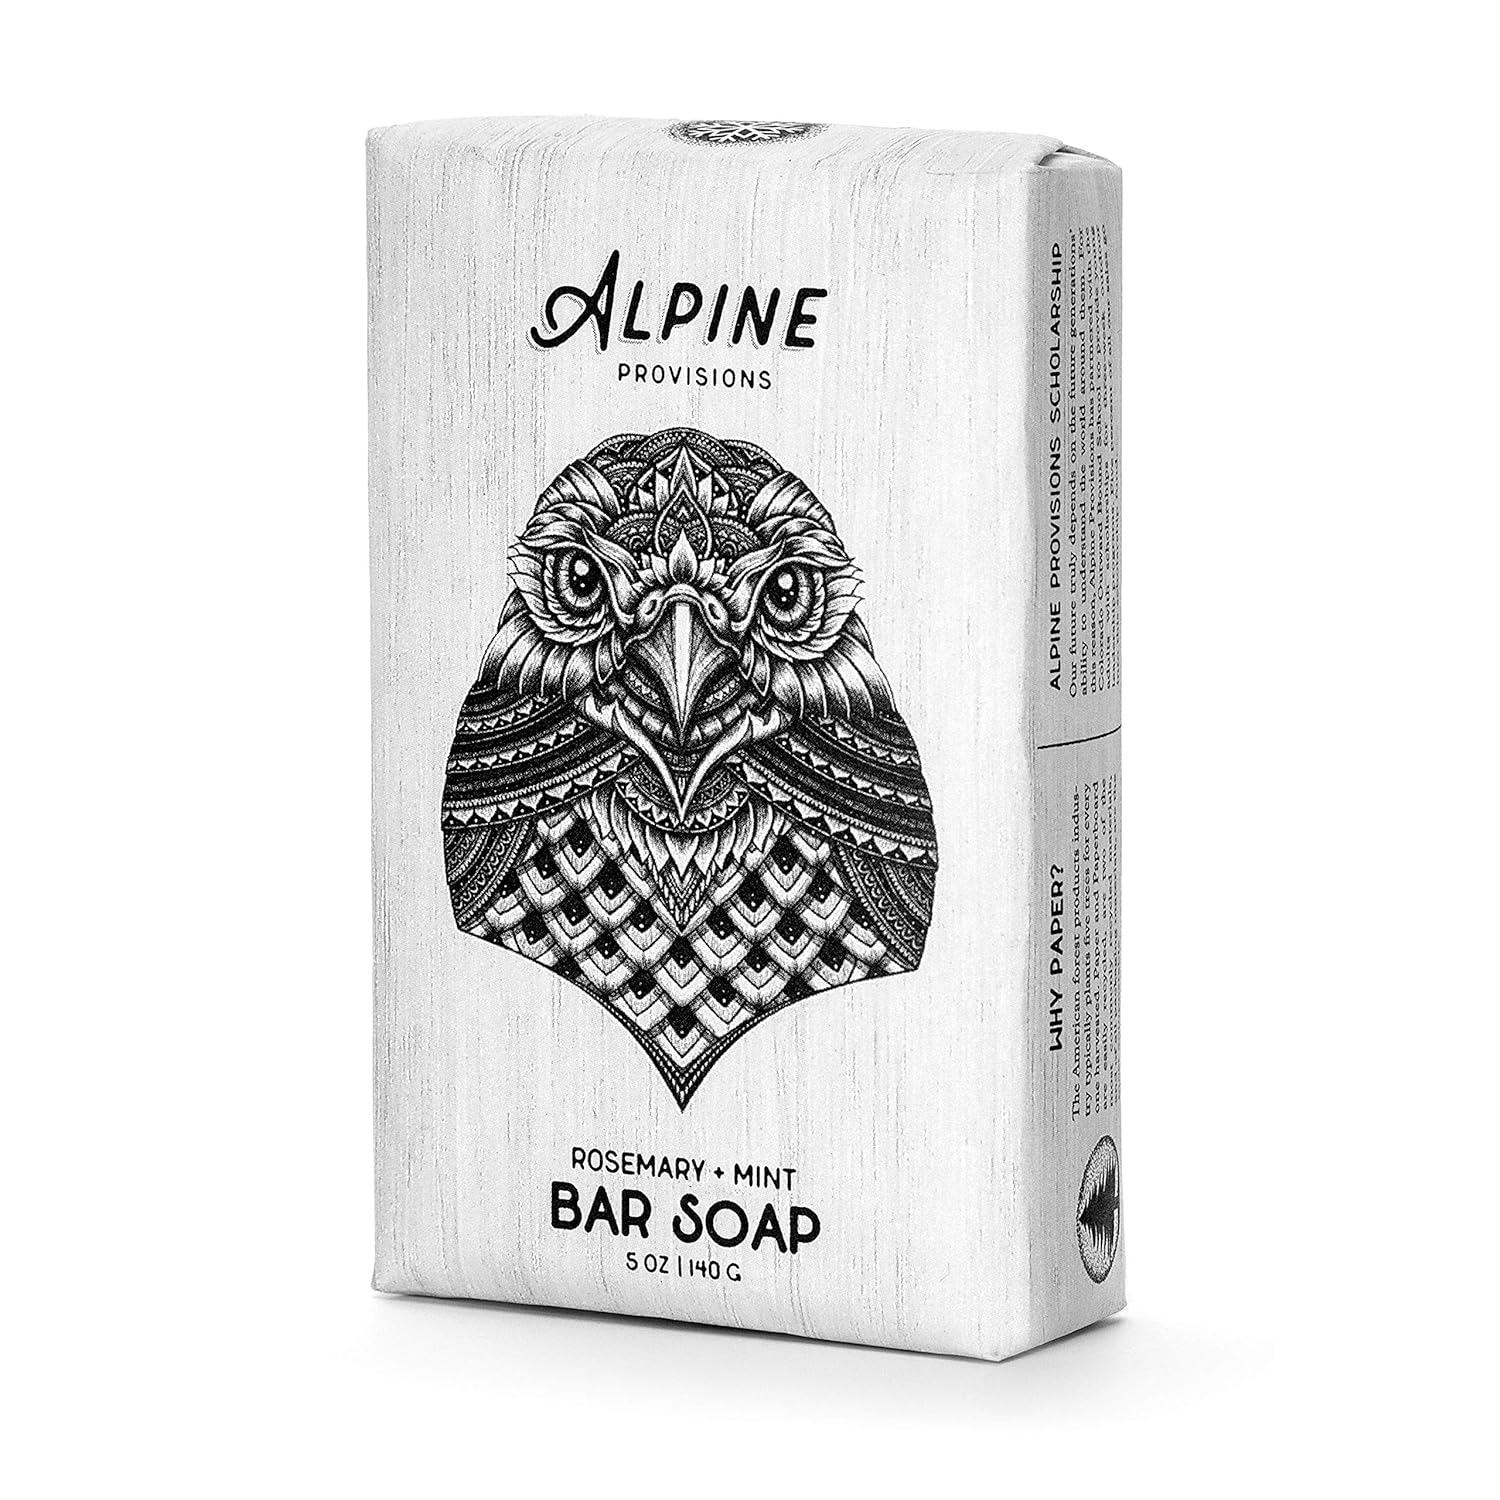 Alpine Provisions Vegan Bar Soap, Rosemary + Mint, 5 , Plastic-free Paper Wrapping